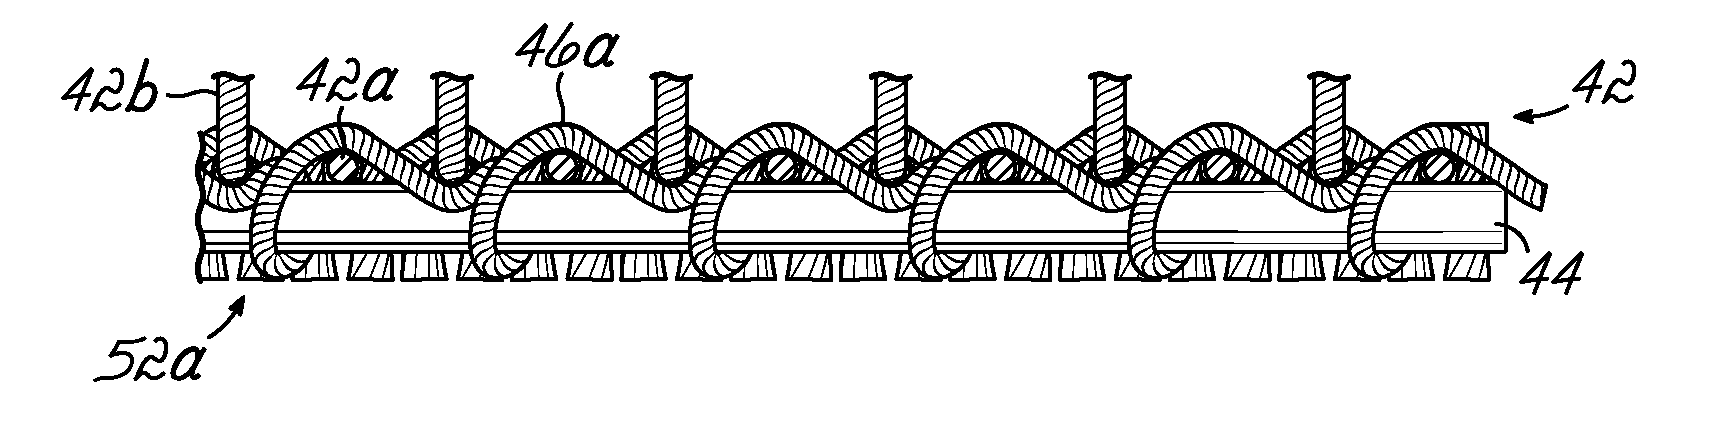 Method and system for producing simulated hand-woven rugs